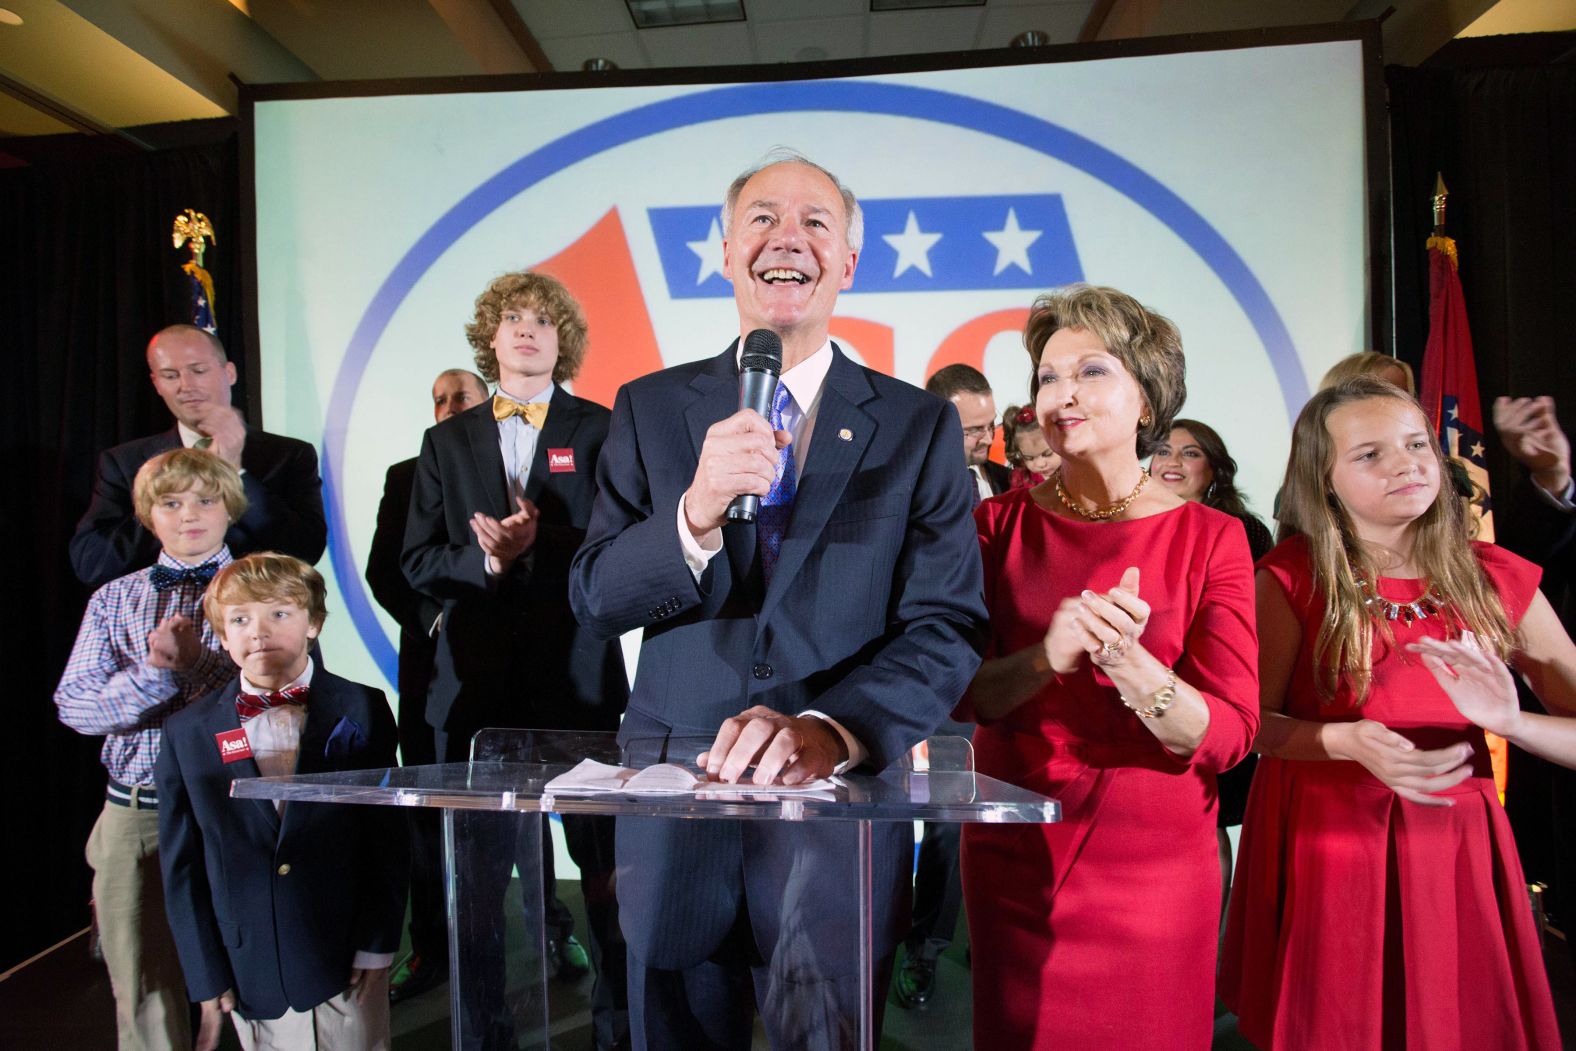 Hutchinson — with his wife, Susan, and other family members by his side — gives a speech after being elected governor of Arkansas in November 2014.